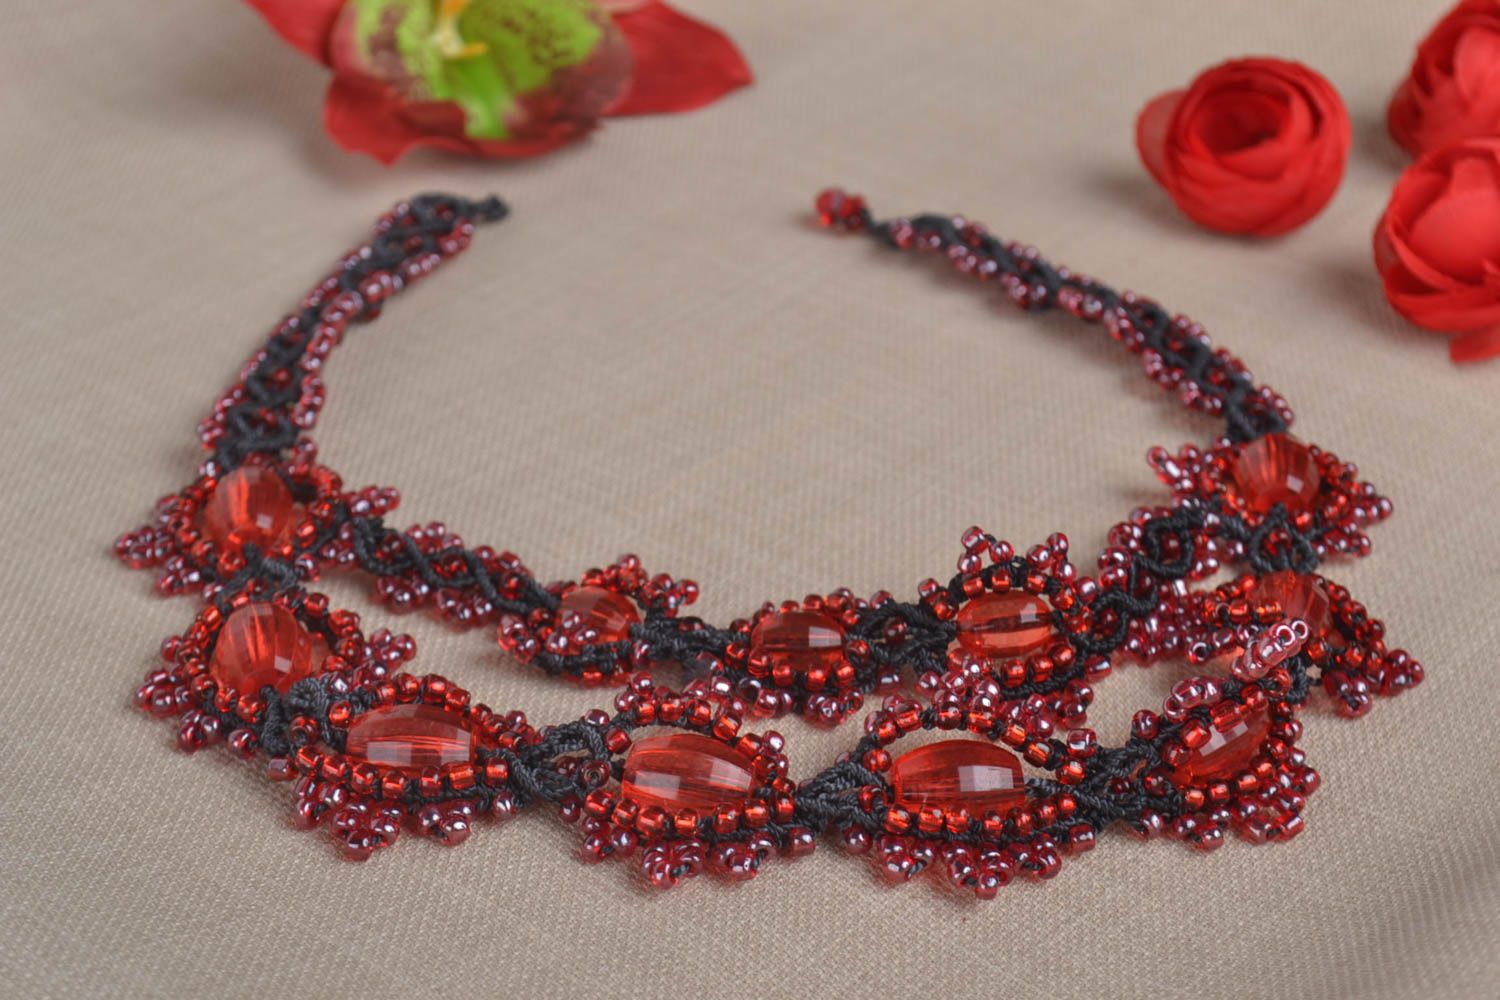 Stylish handmade woven lace necklace textile necklace accessories for girls photo 1